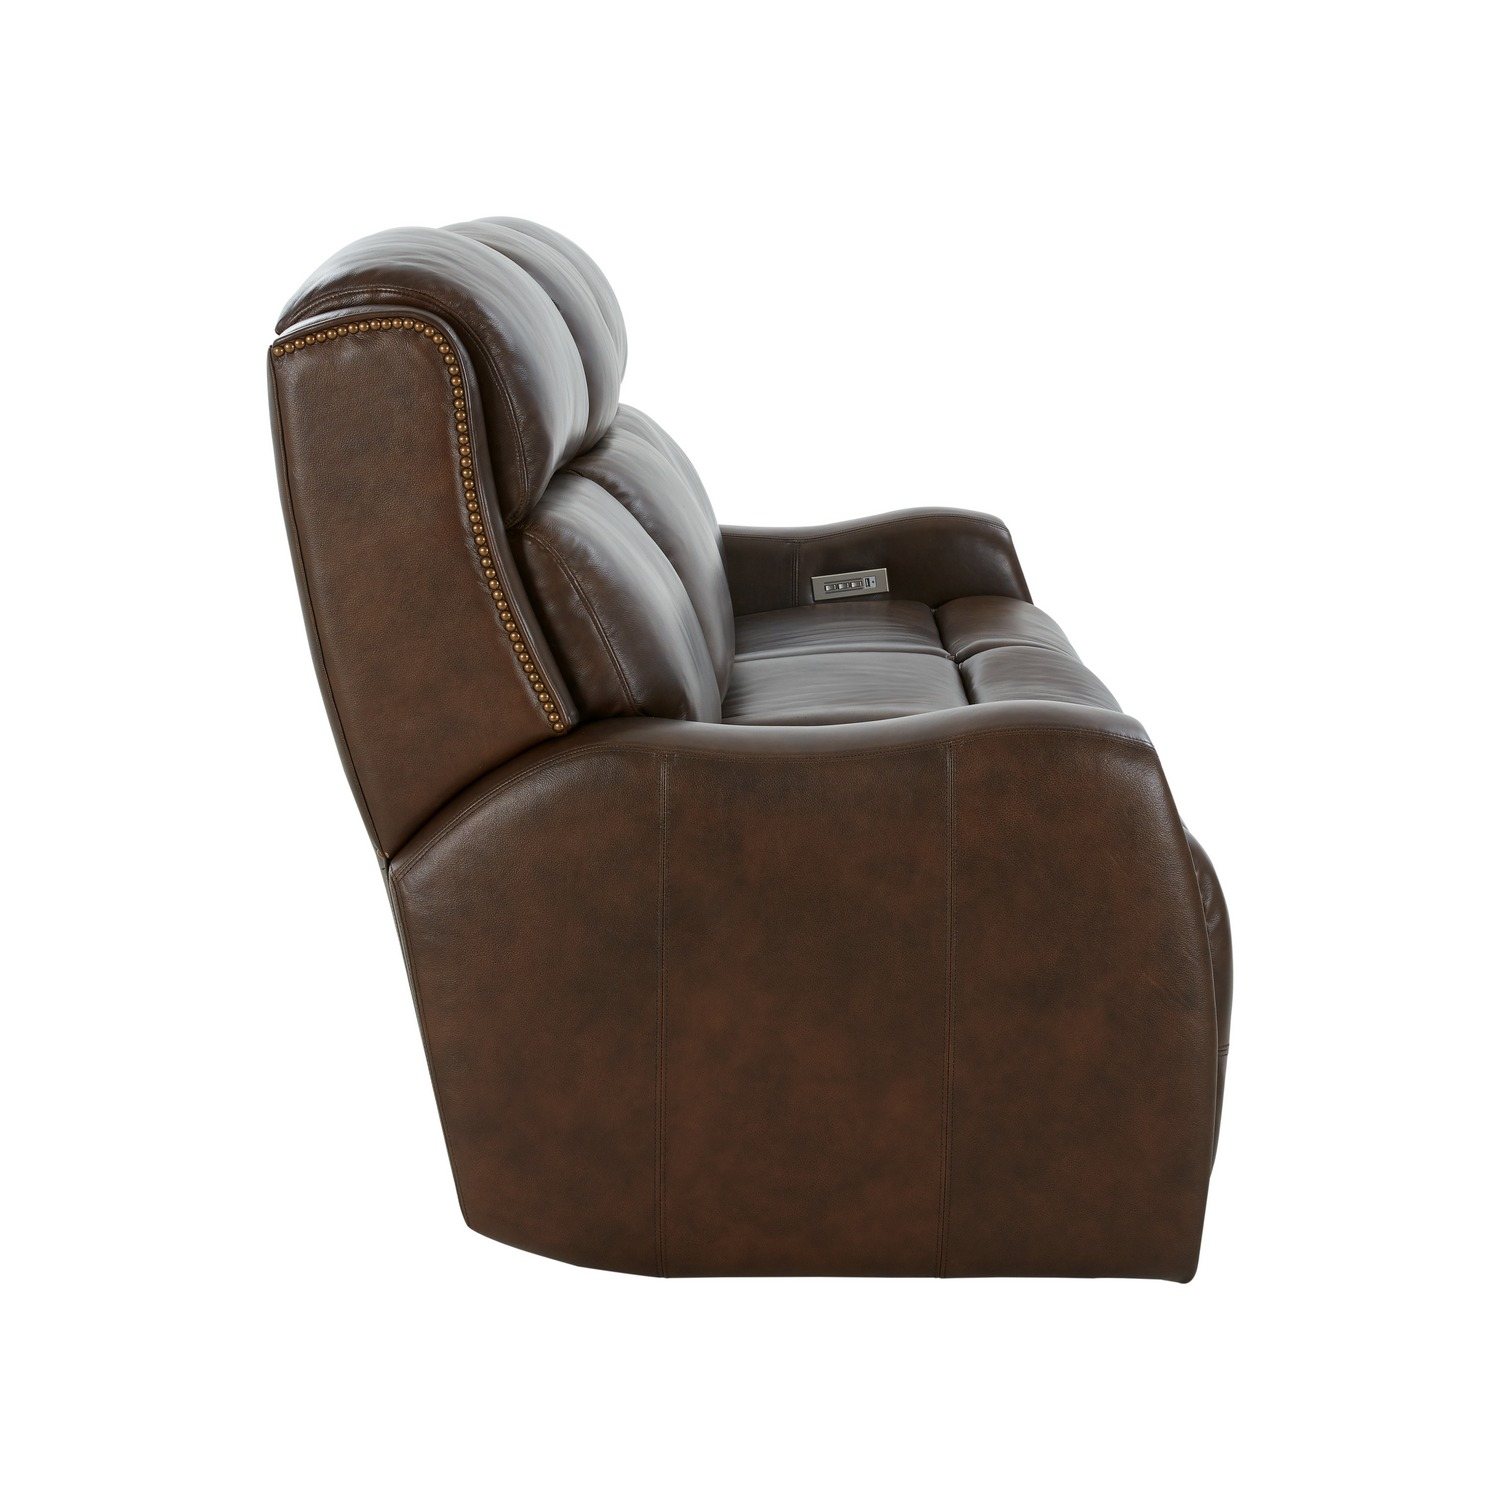 Barcalounger Brookside Power Reclining Sofa with Power Head Rests and Power Lumbar - Ashford Walnut/All Leather